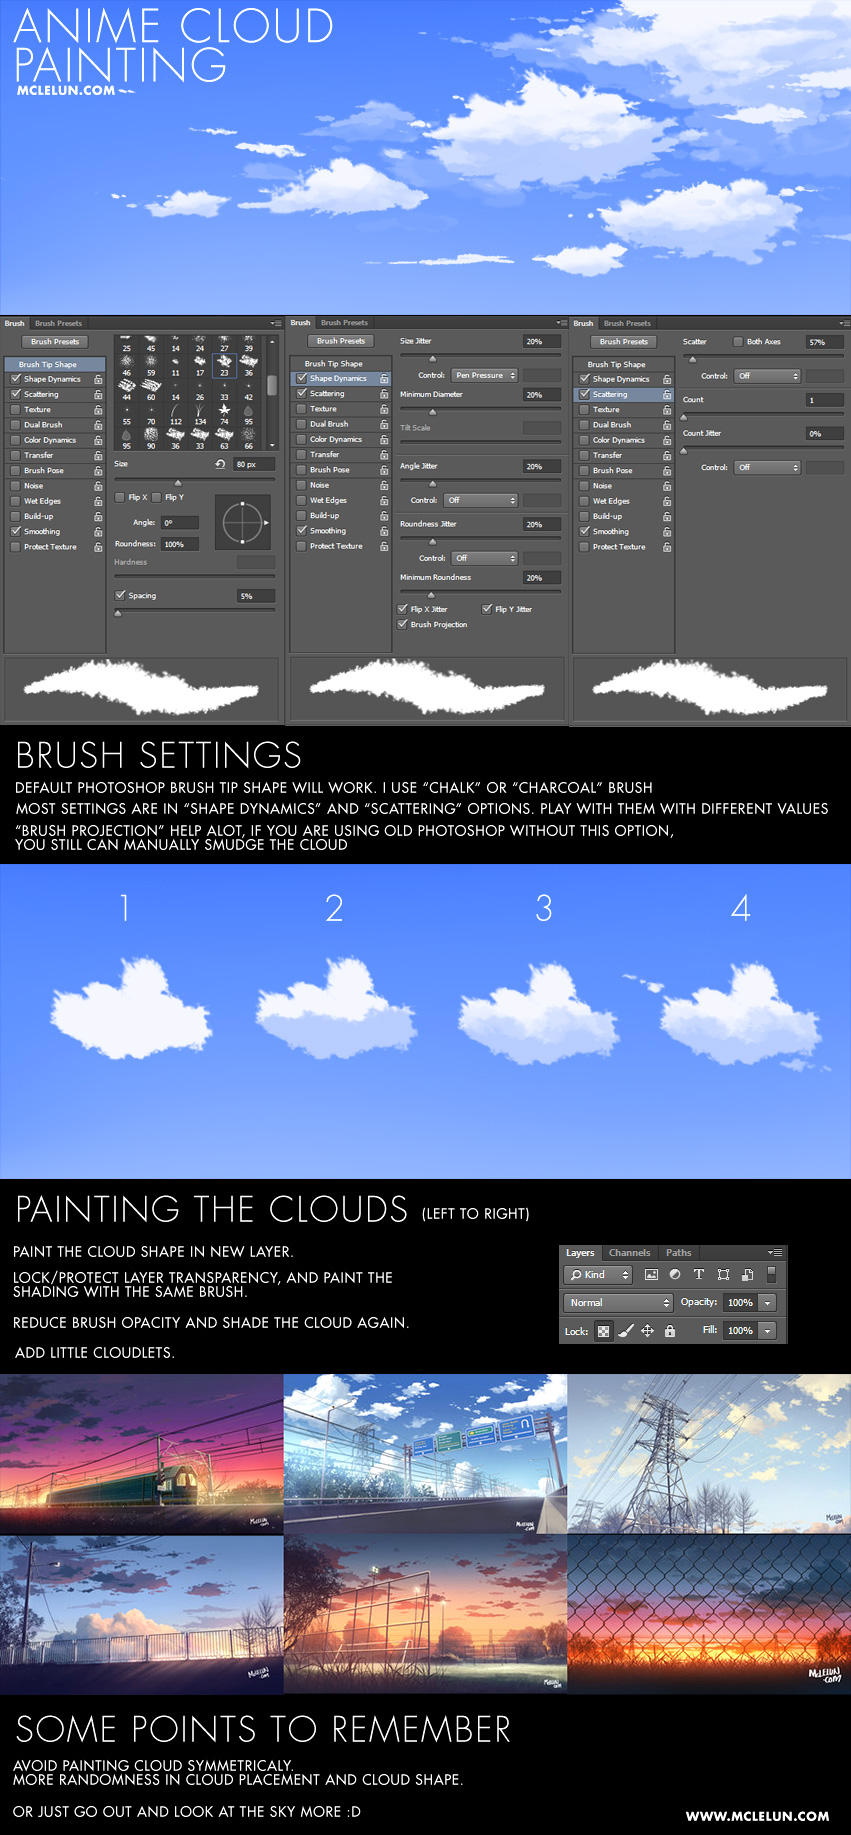 Photoshop brush settings for anime cloud painting